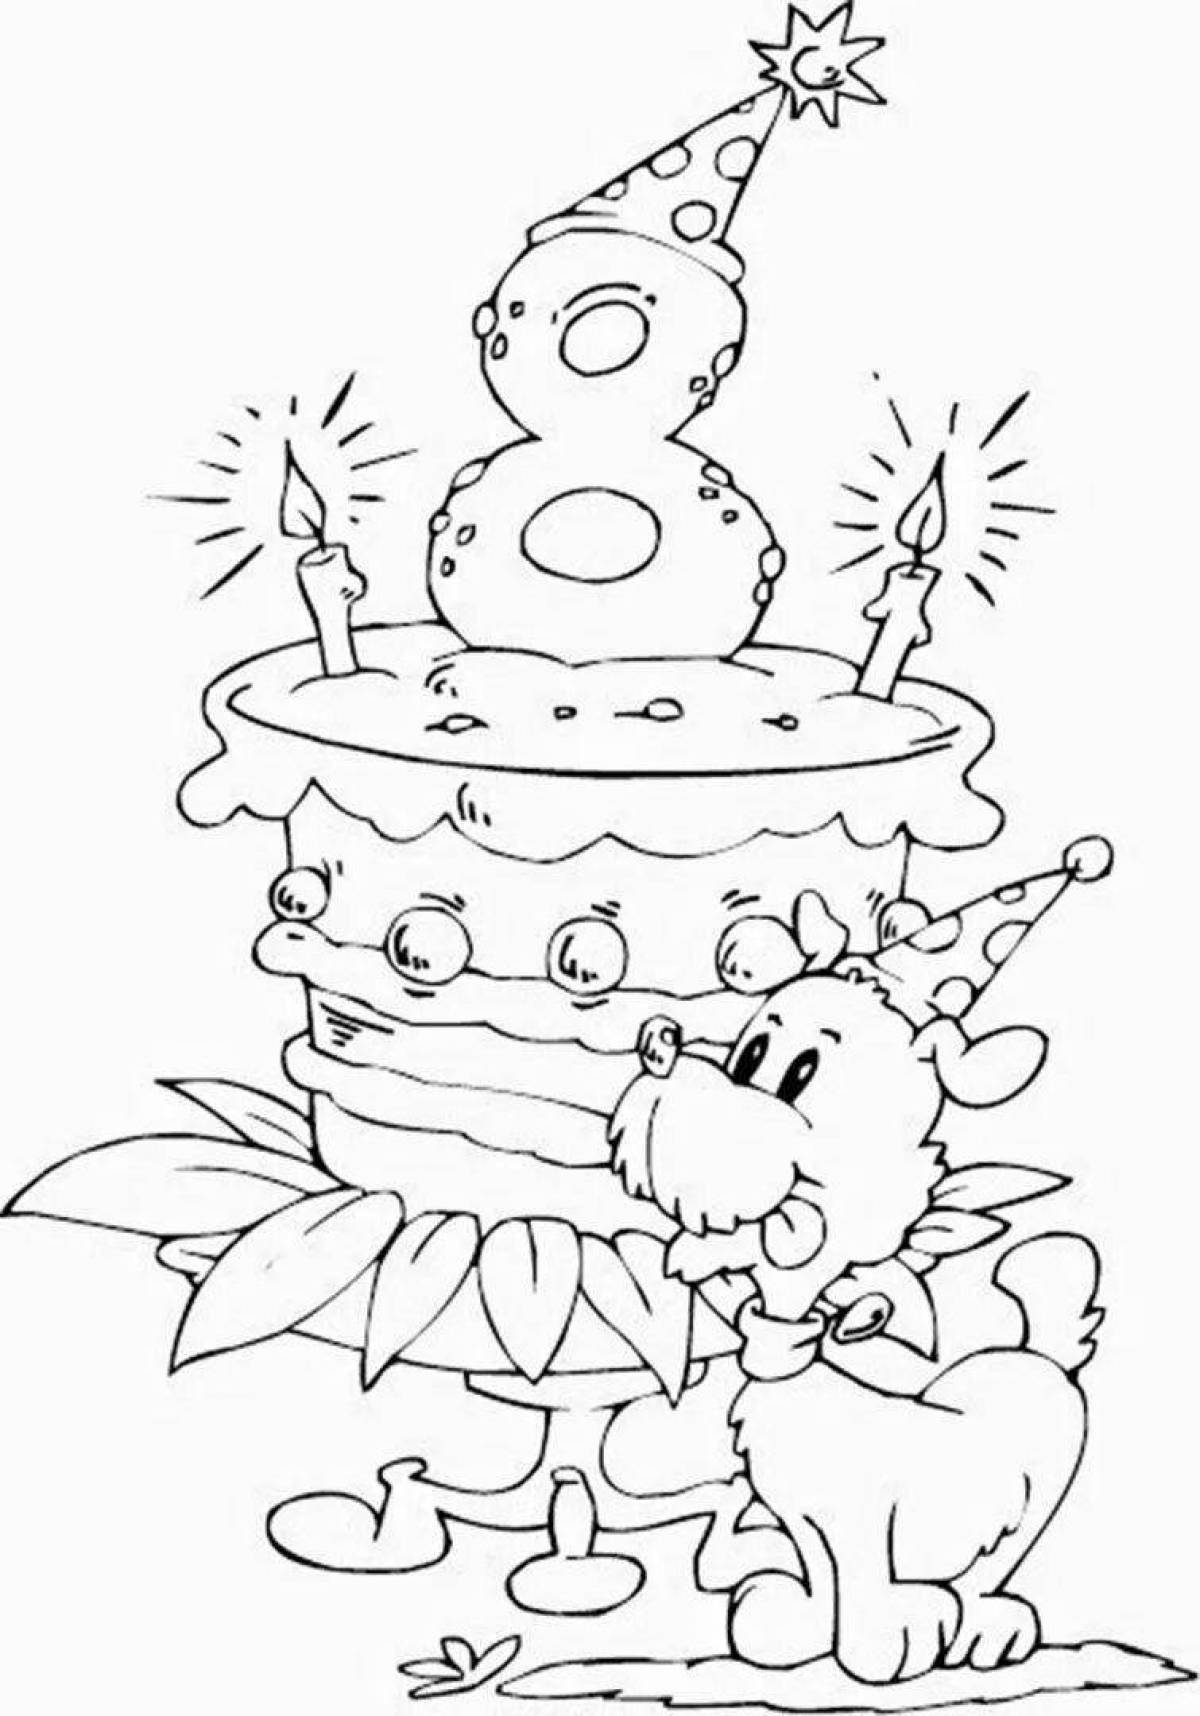 Exciting sister birthday coloring page